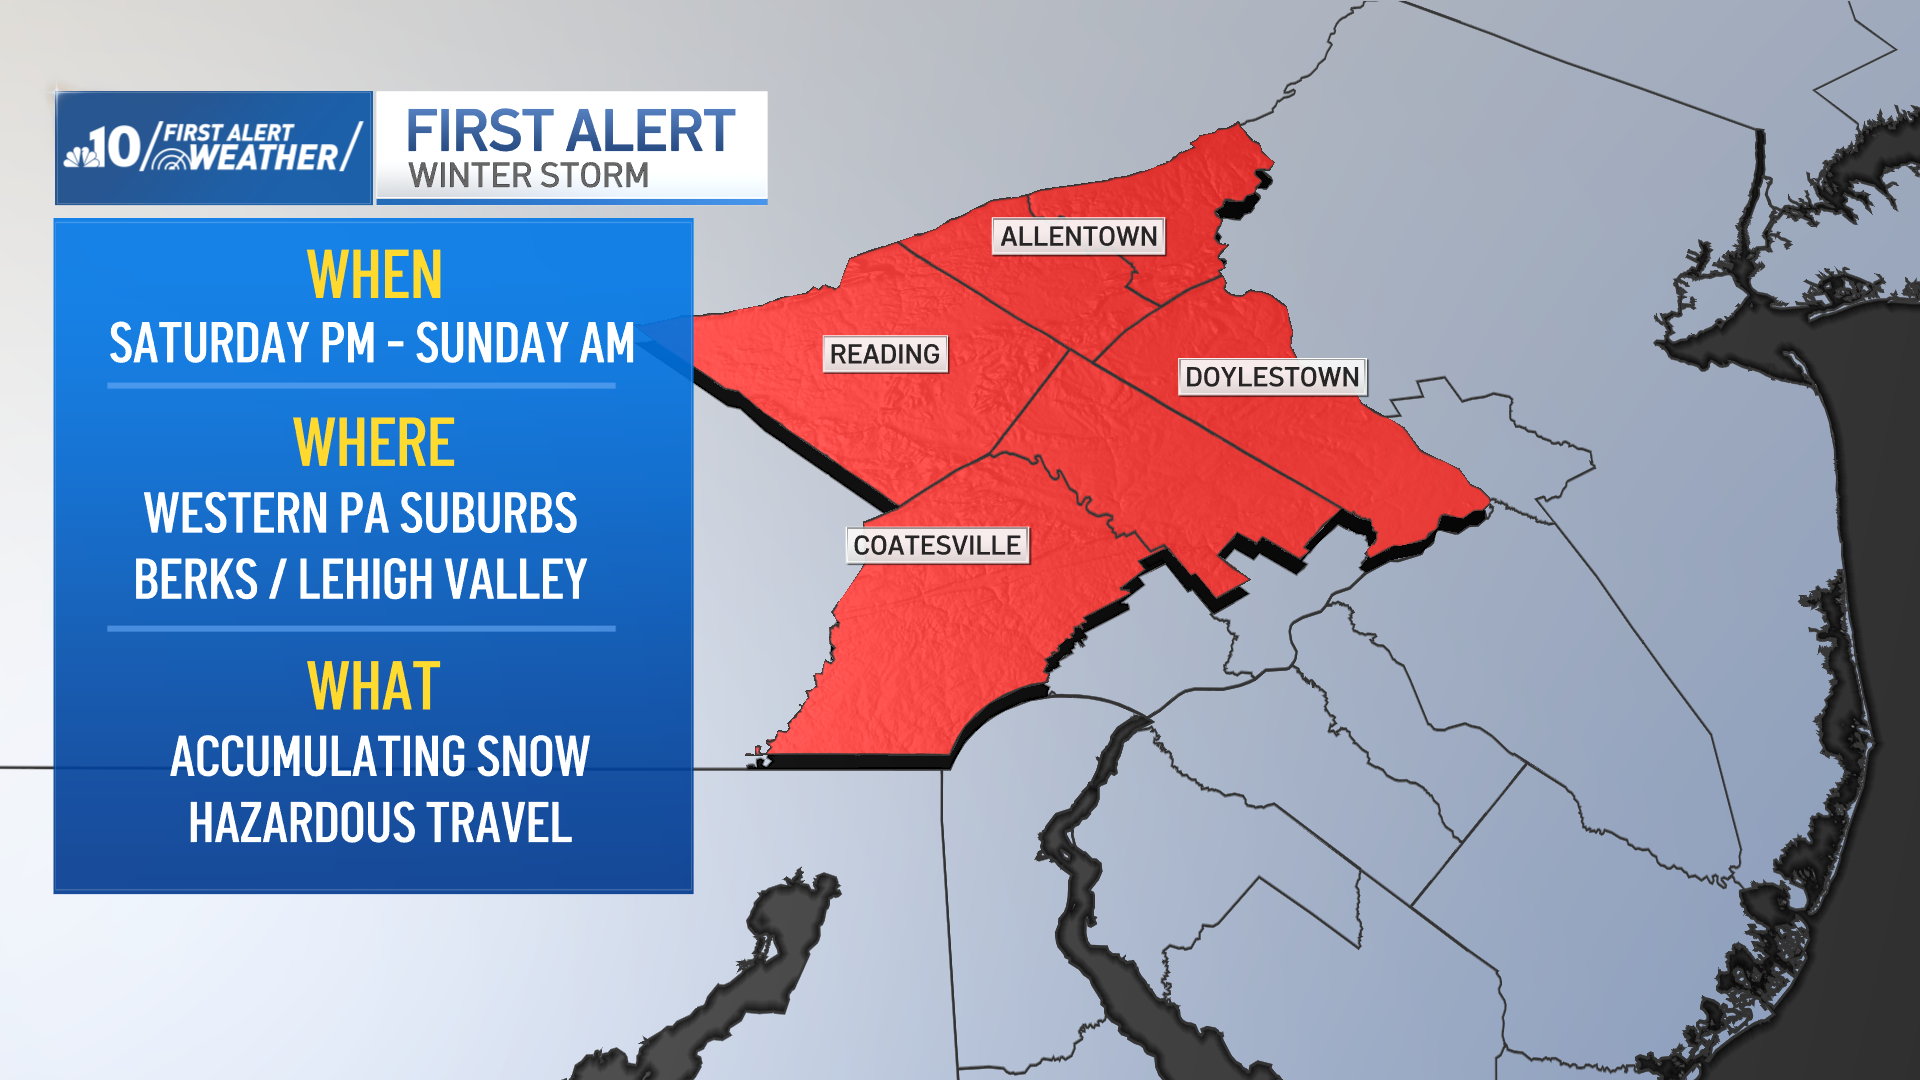 Western parts of the Pennsylvania suburbs, the Lehigh Valley and Berks county are under a First Alert Saturday night into Sunday morning due to the winter storm.